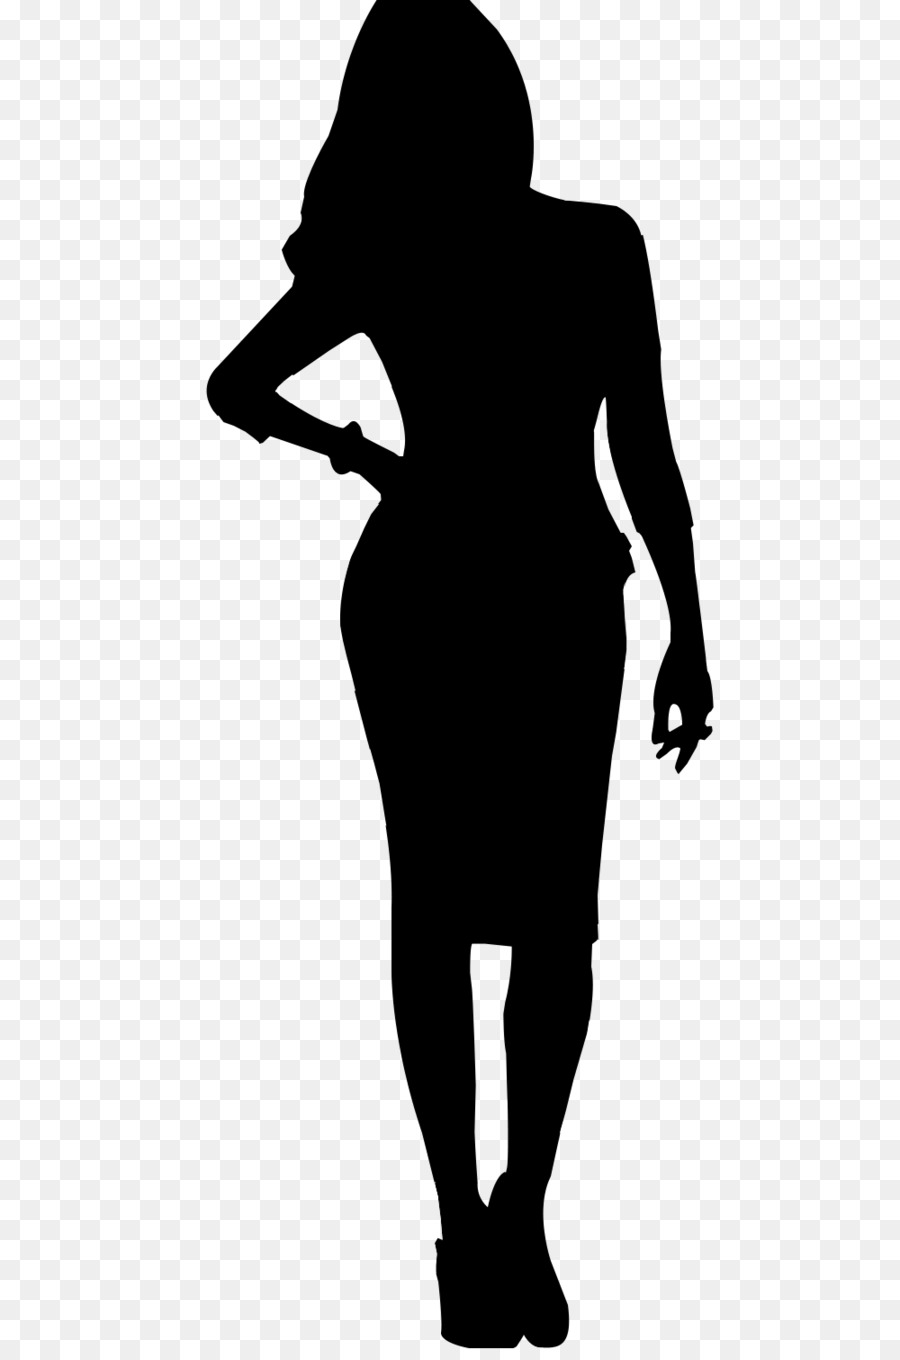 Free Silhouette Woman Standing, Download Free Silhouette Woman Standing ...